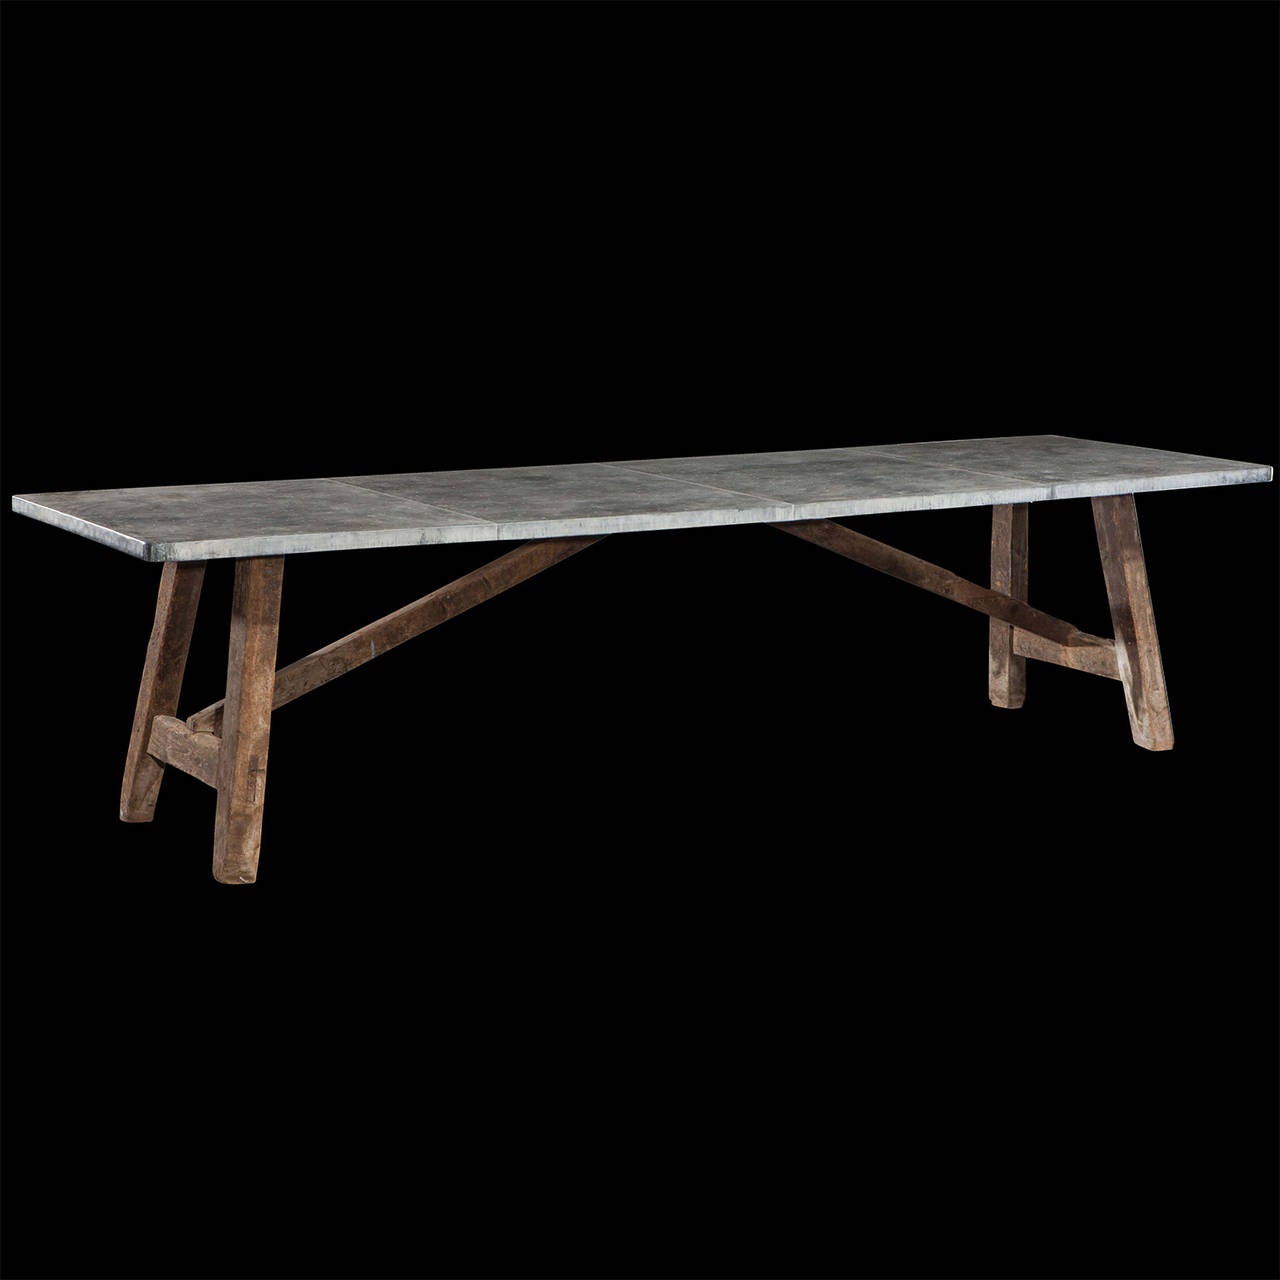 Zinc top preparation table. Simple form with pine base.